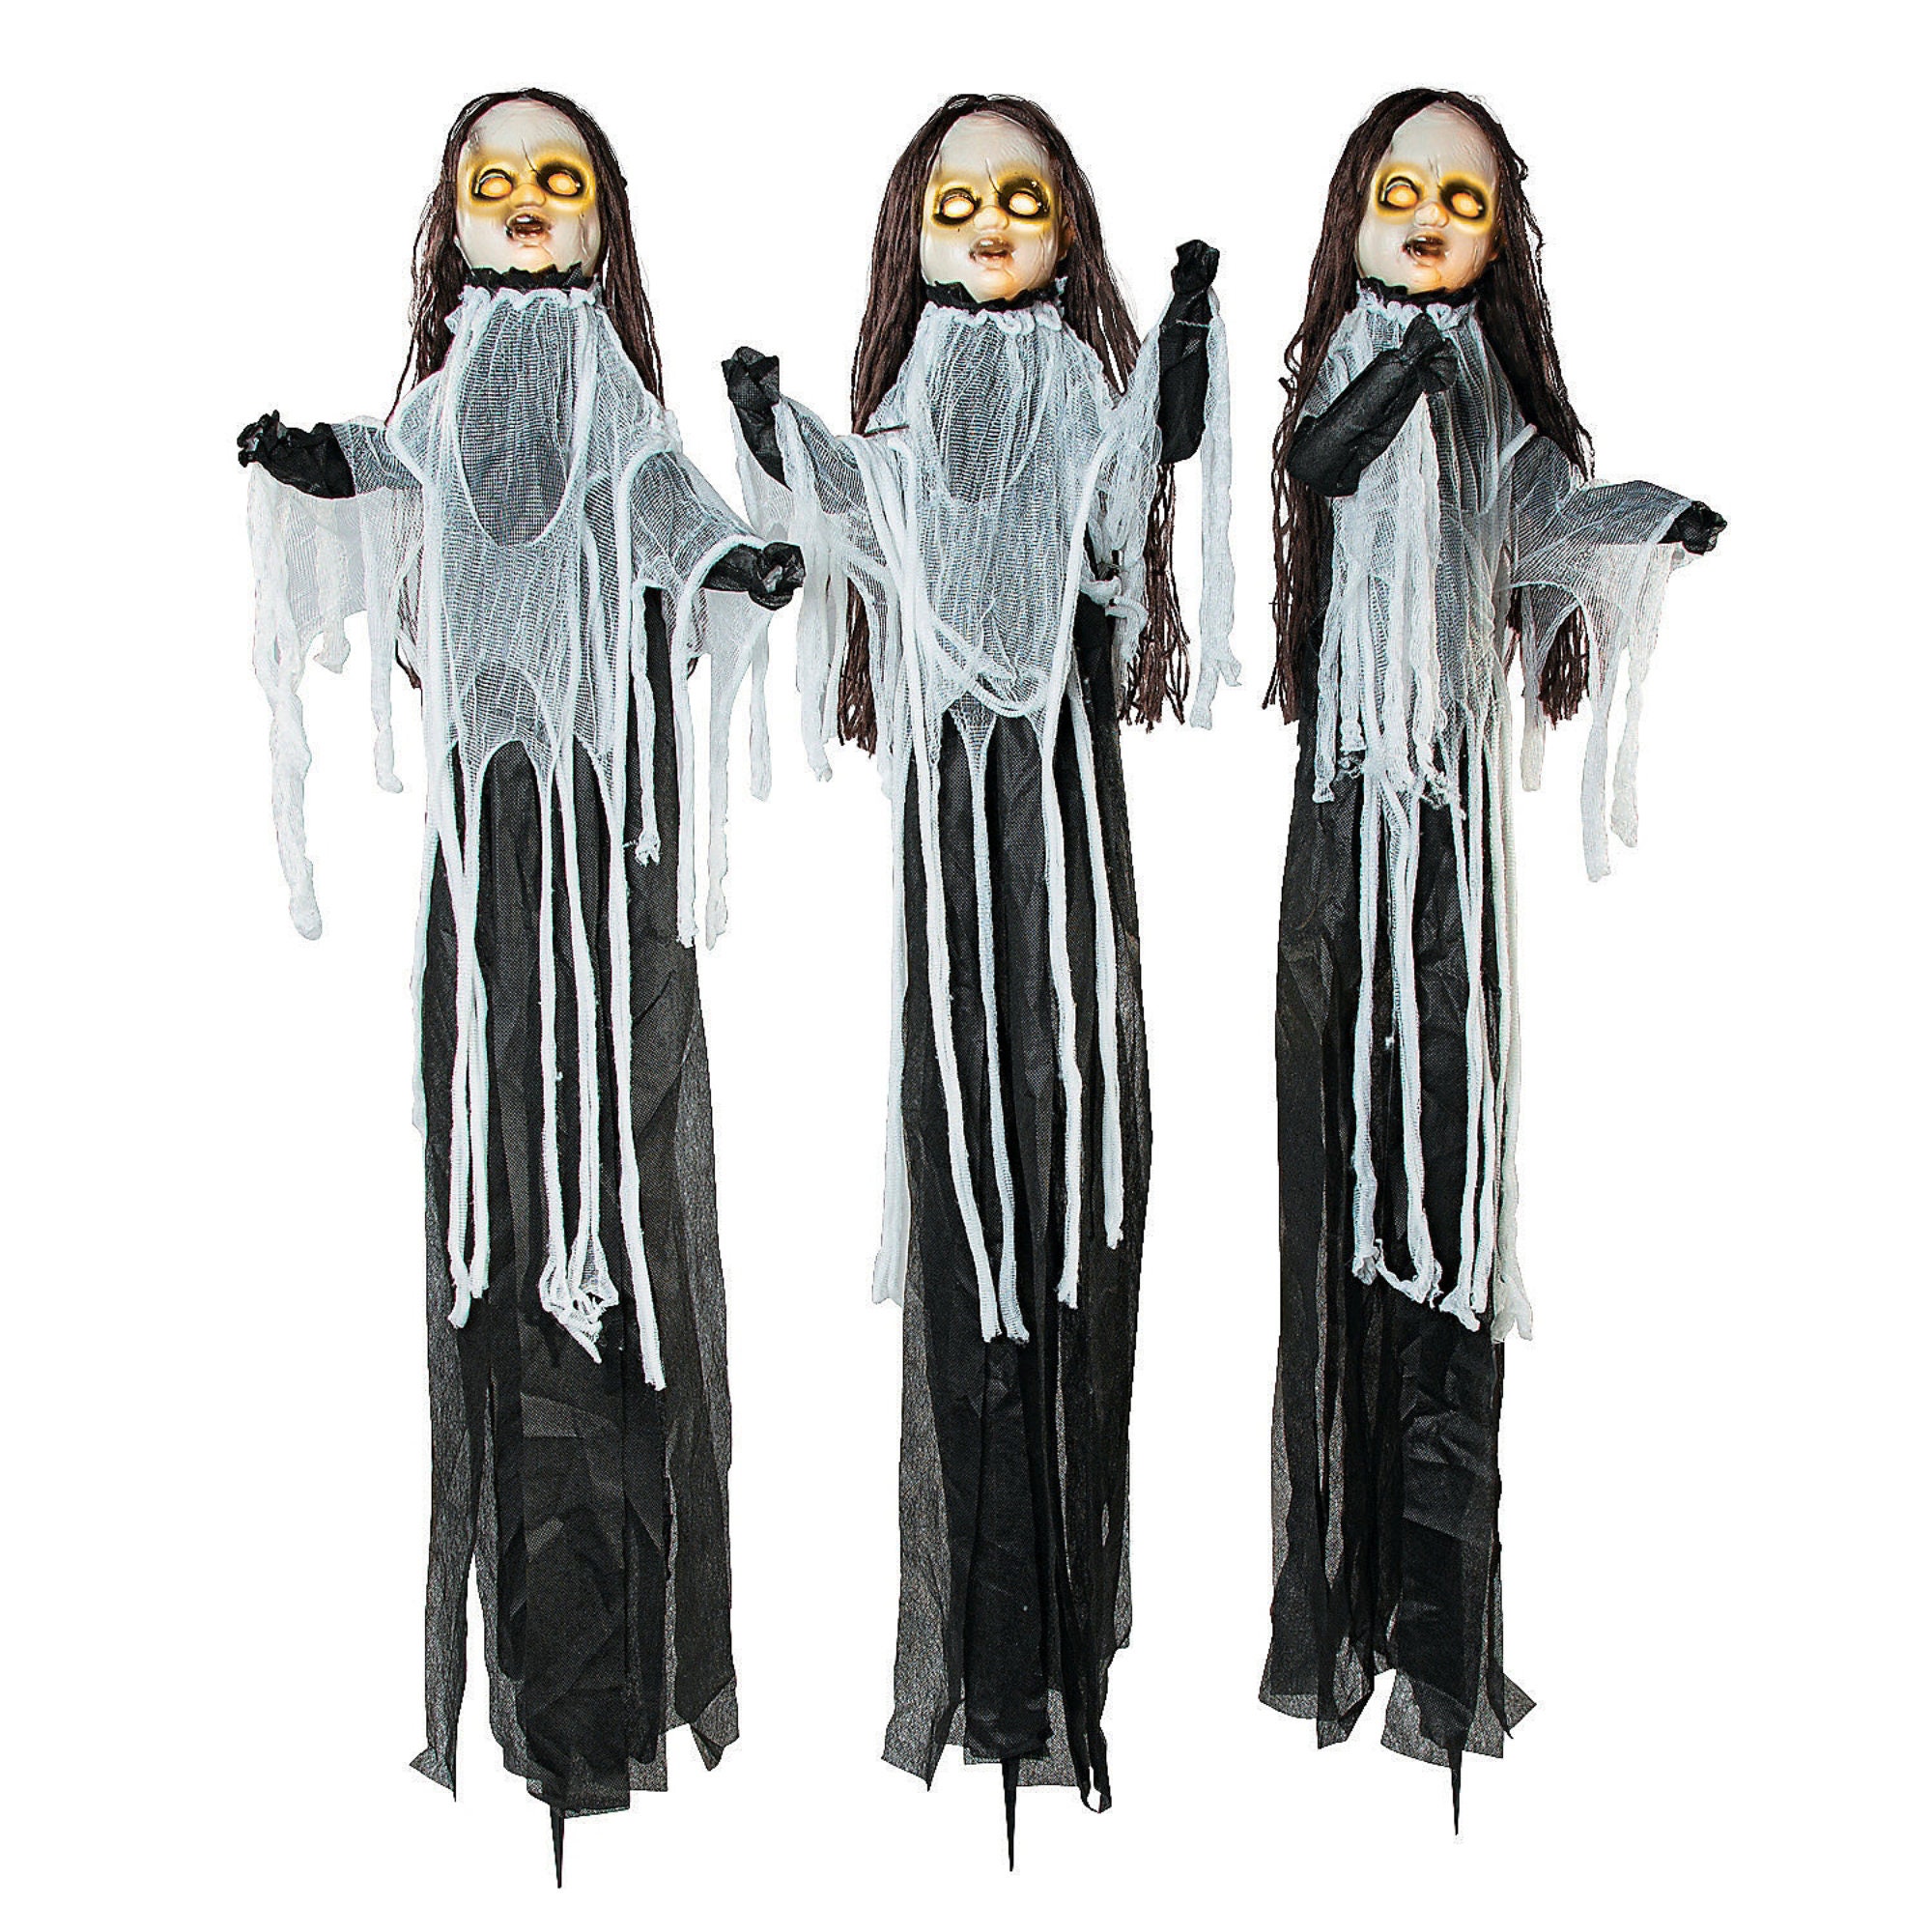 Scary 3-pieces Light-up Halloween Creepy Doll Yard Stake - Etsy